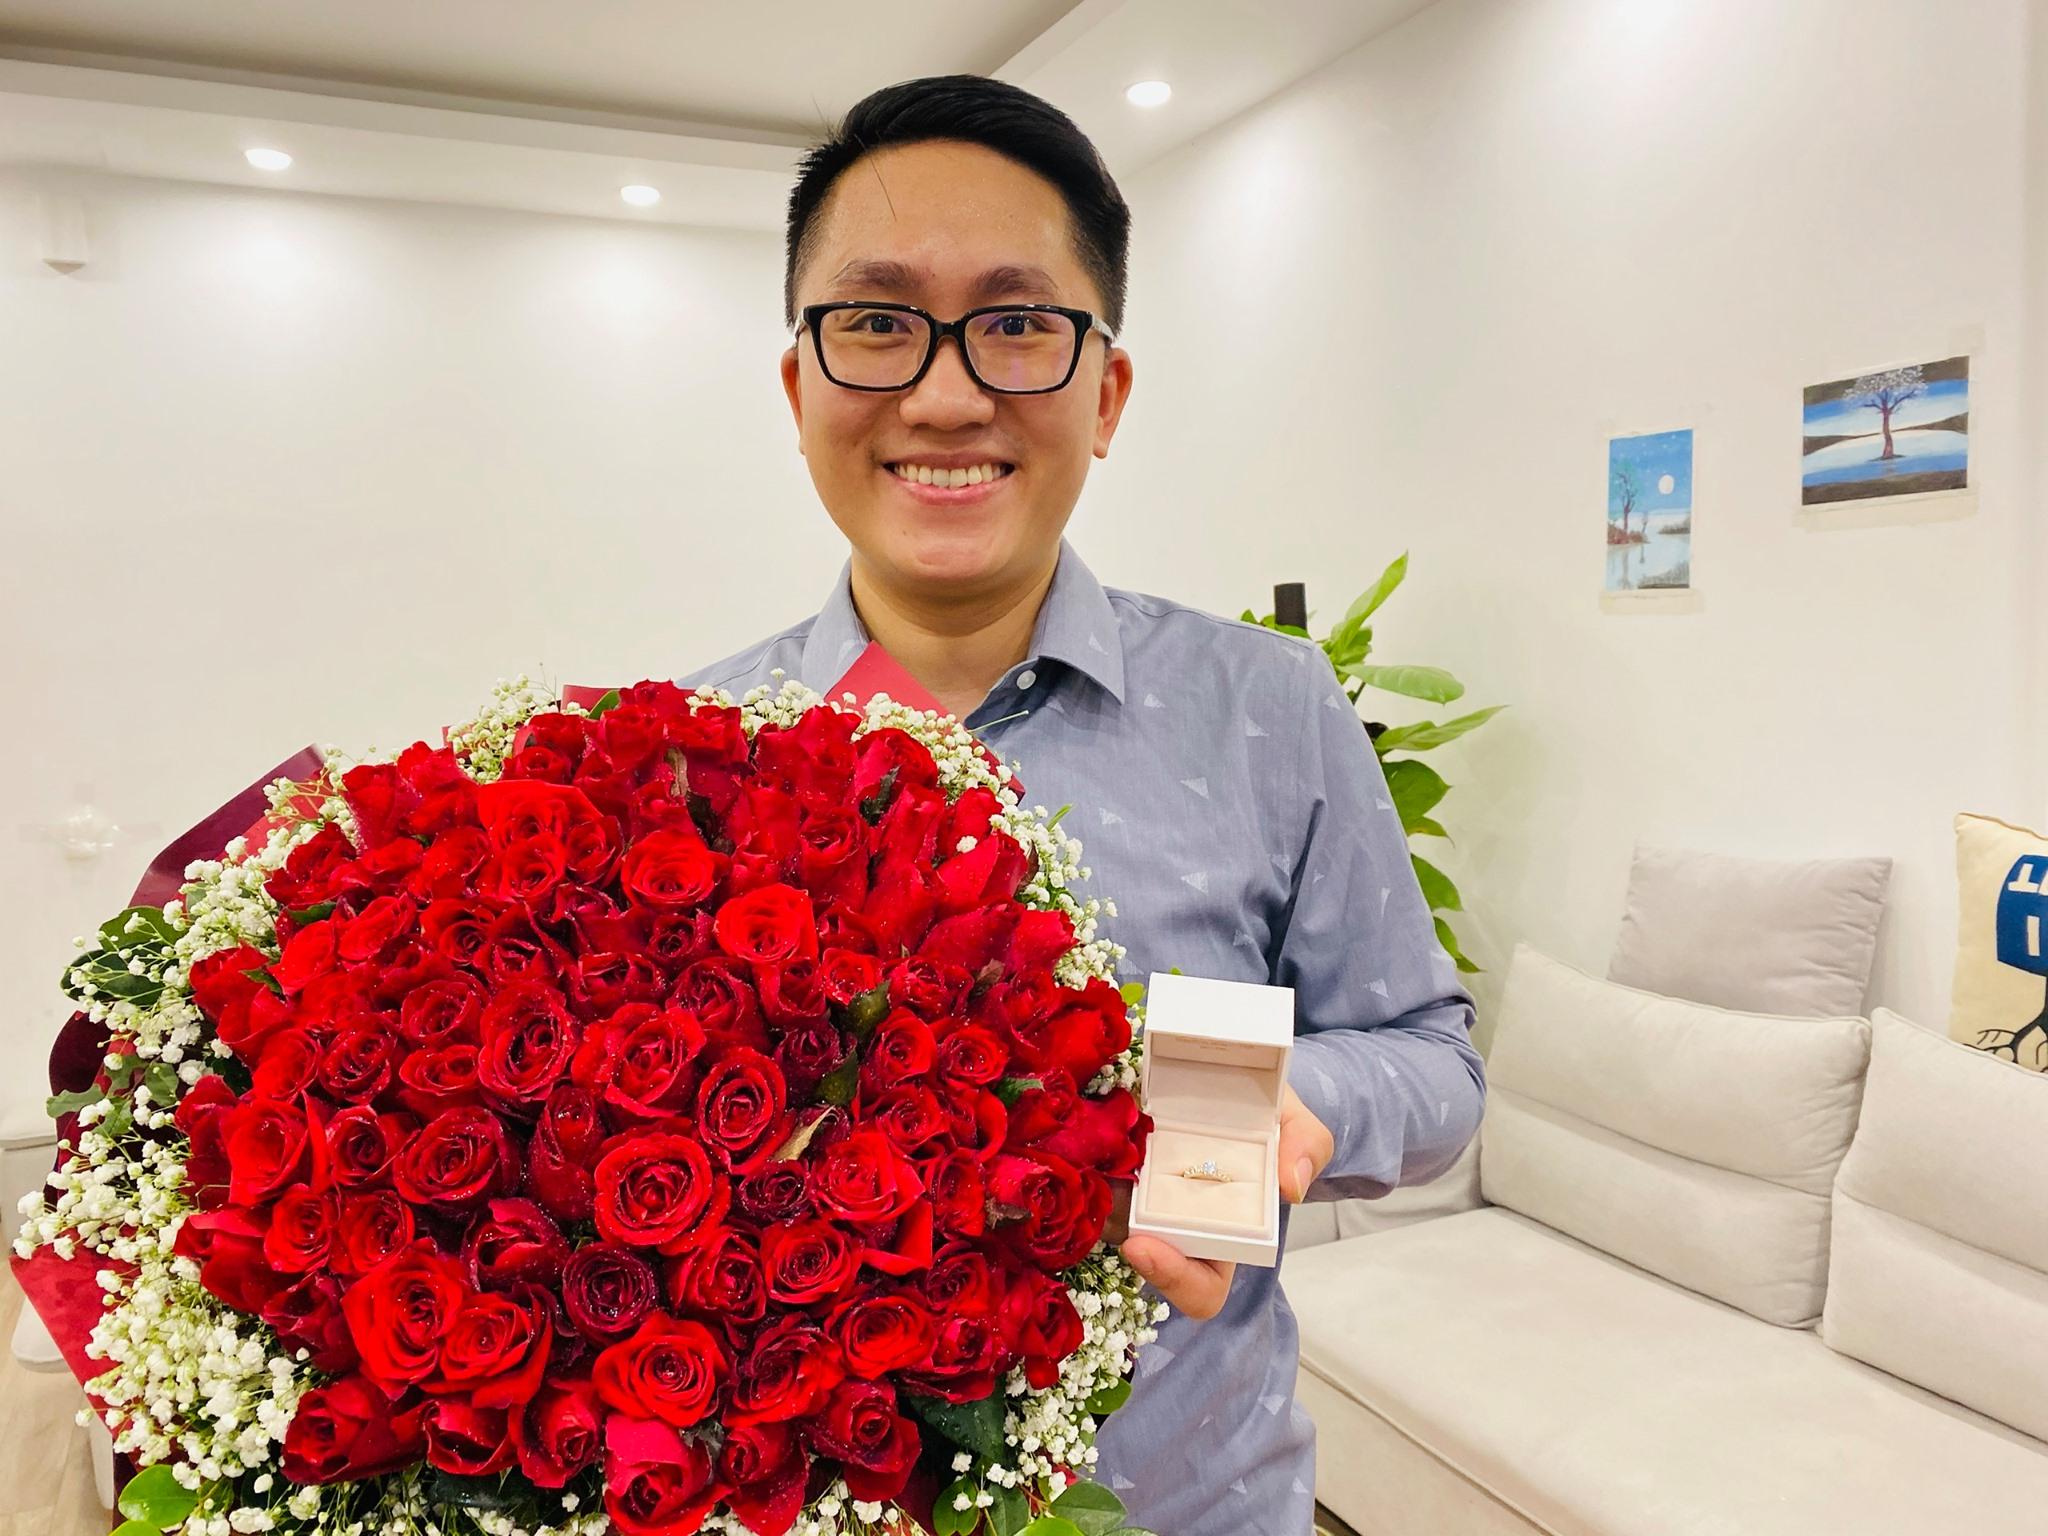 I Love FIFA smiles happily with a bouquet of red roses